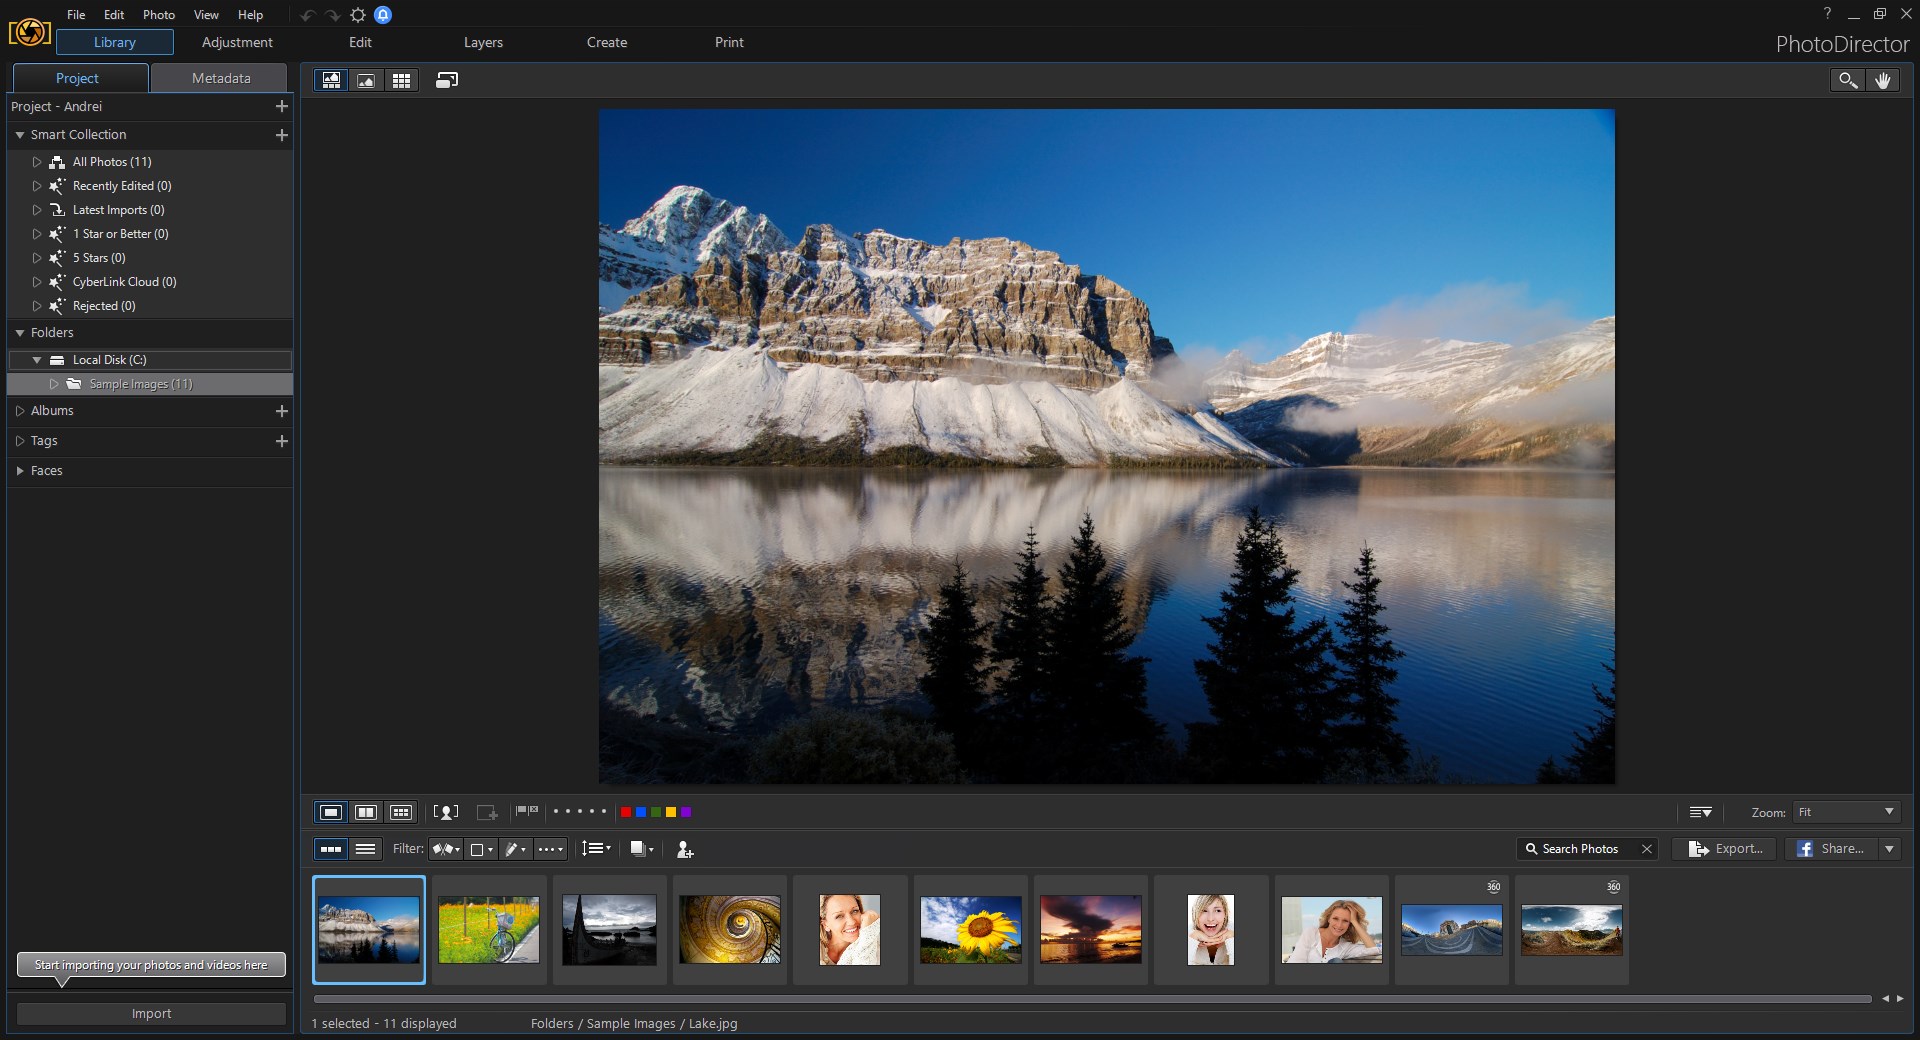 photodirector deluxe review